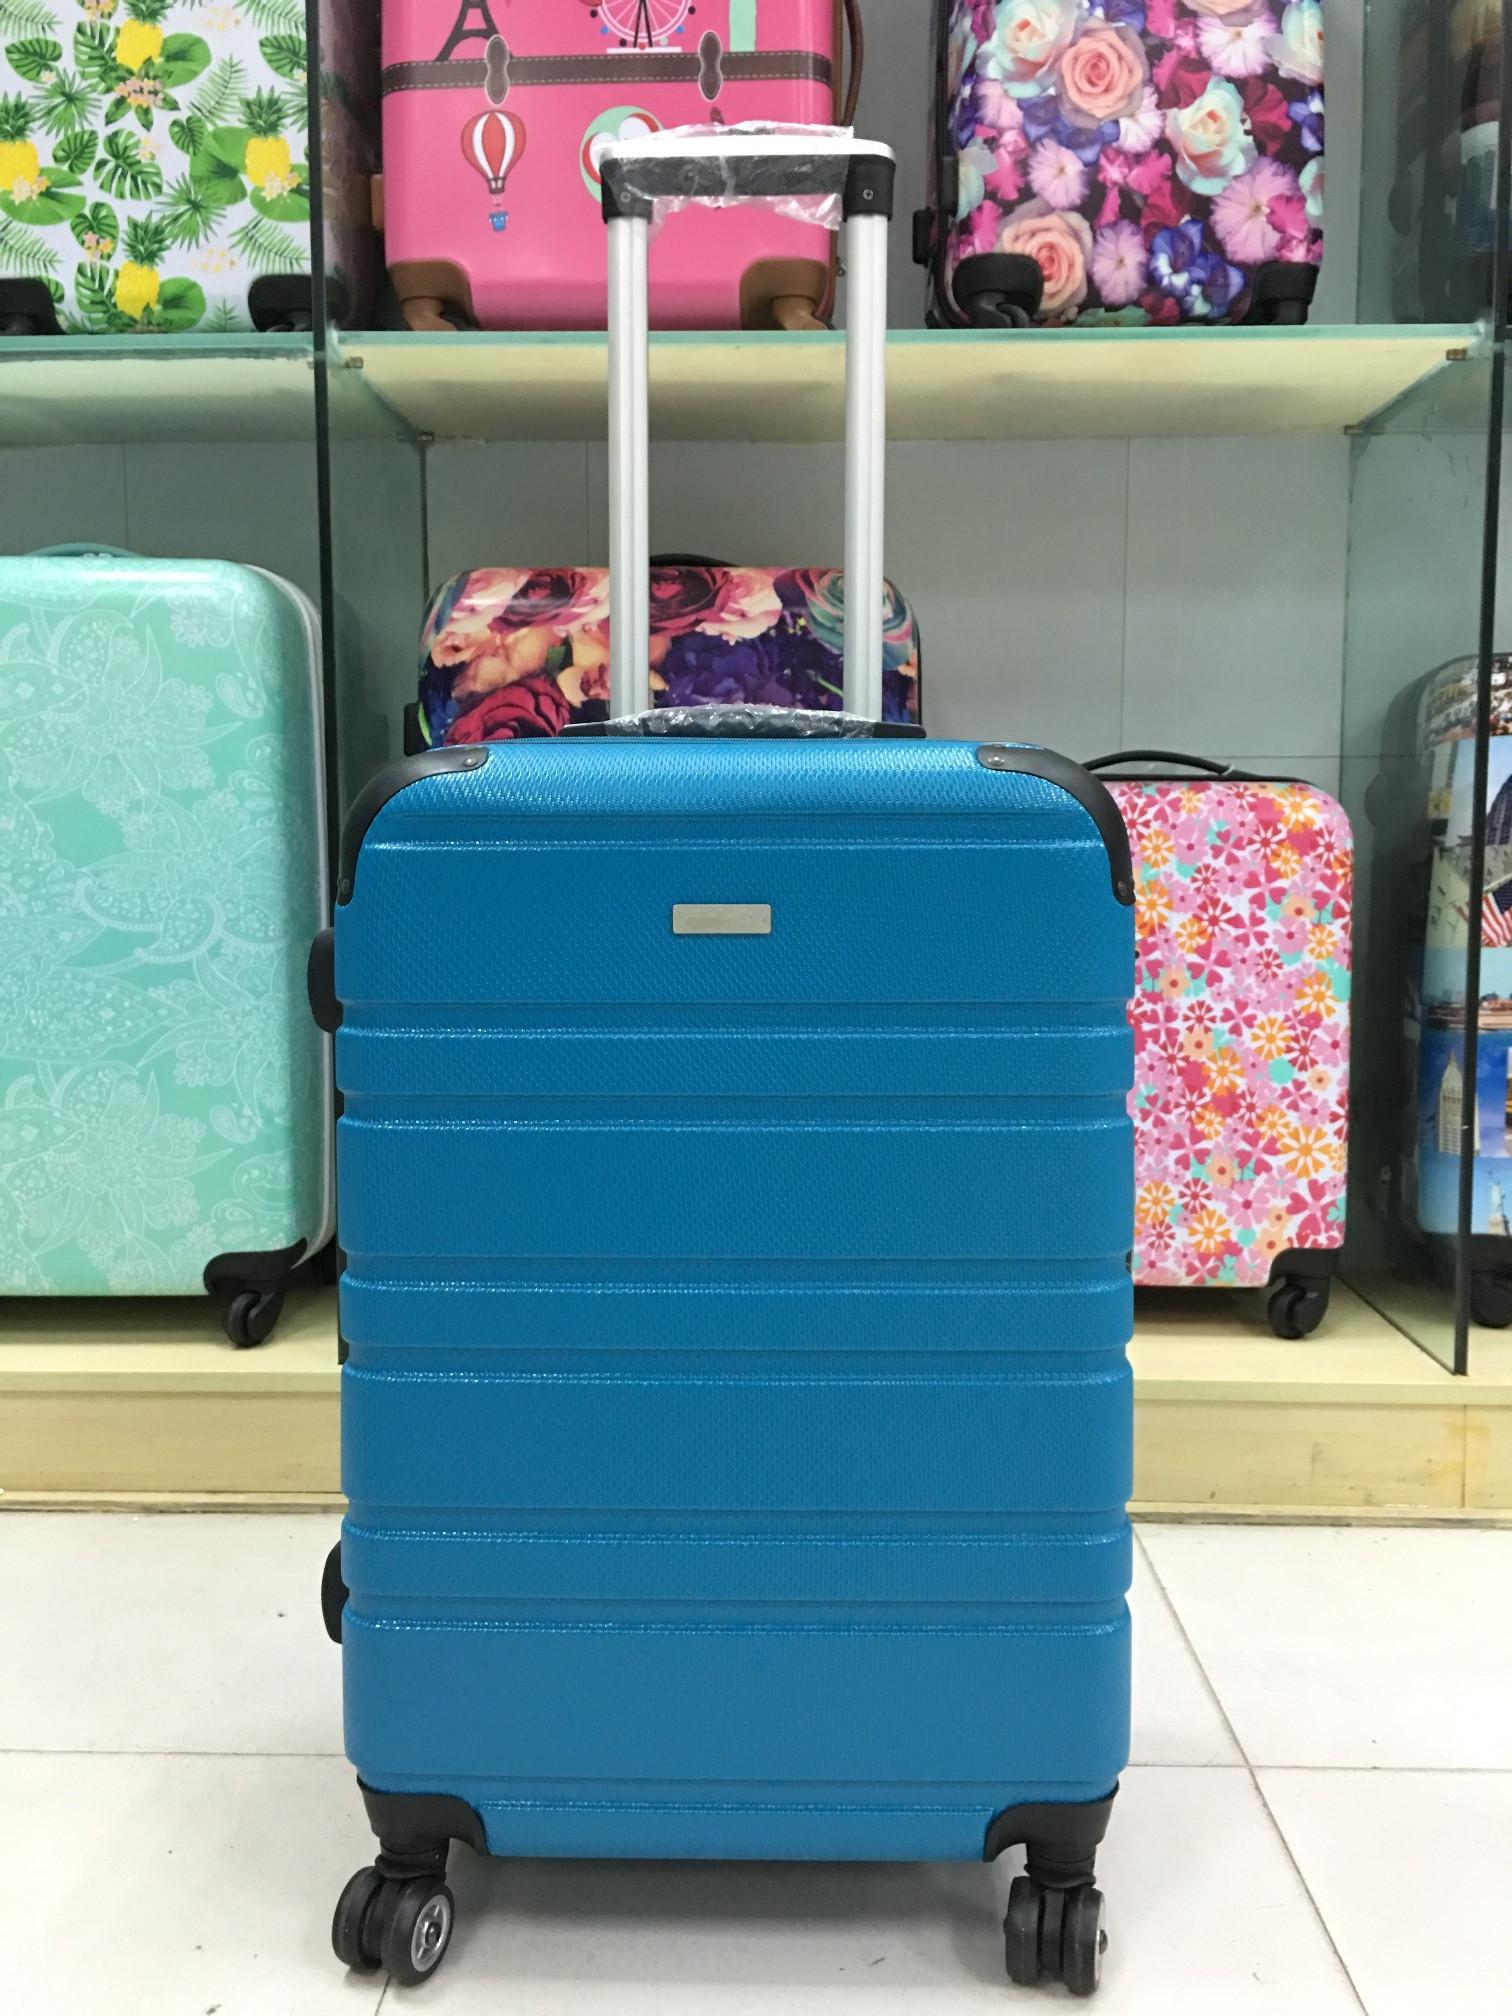 yanteng hand luggage suitcase in blue color